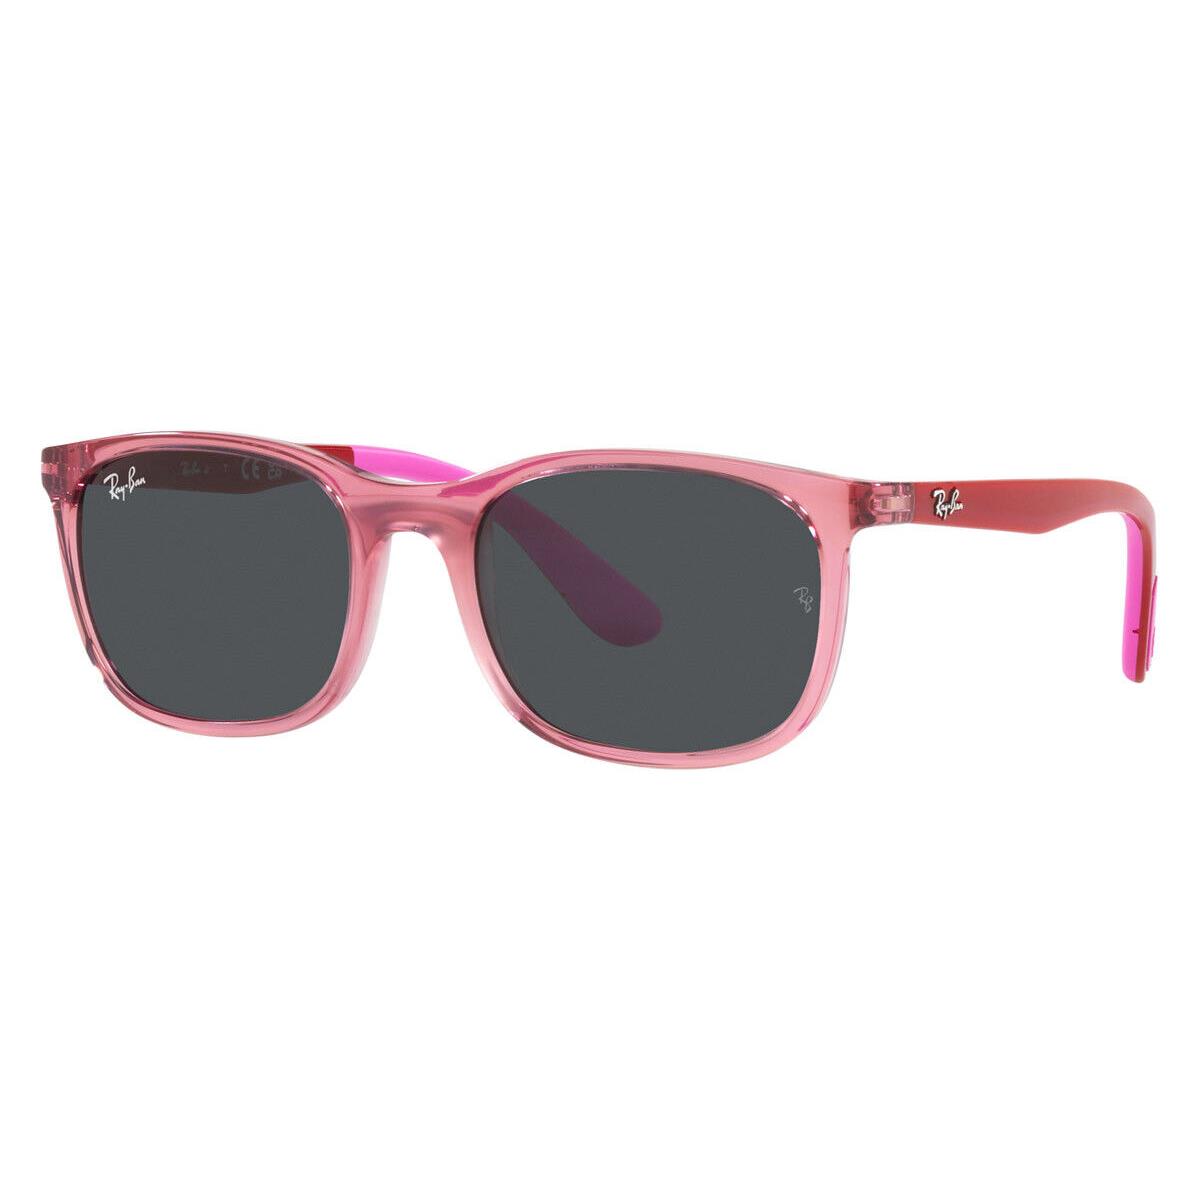 Ray-ban RJ9076S Sunglasses Transparent Pink on Rubber Pink Dark Gray 49mm